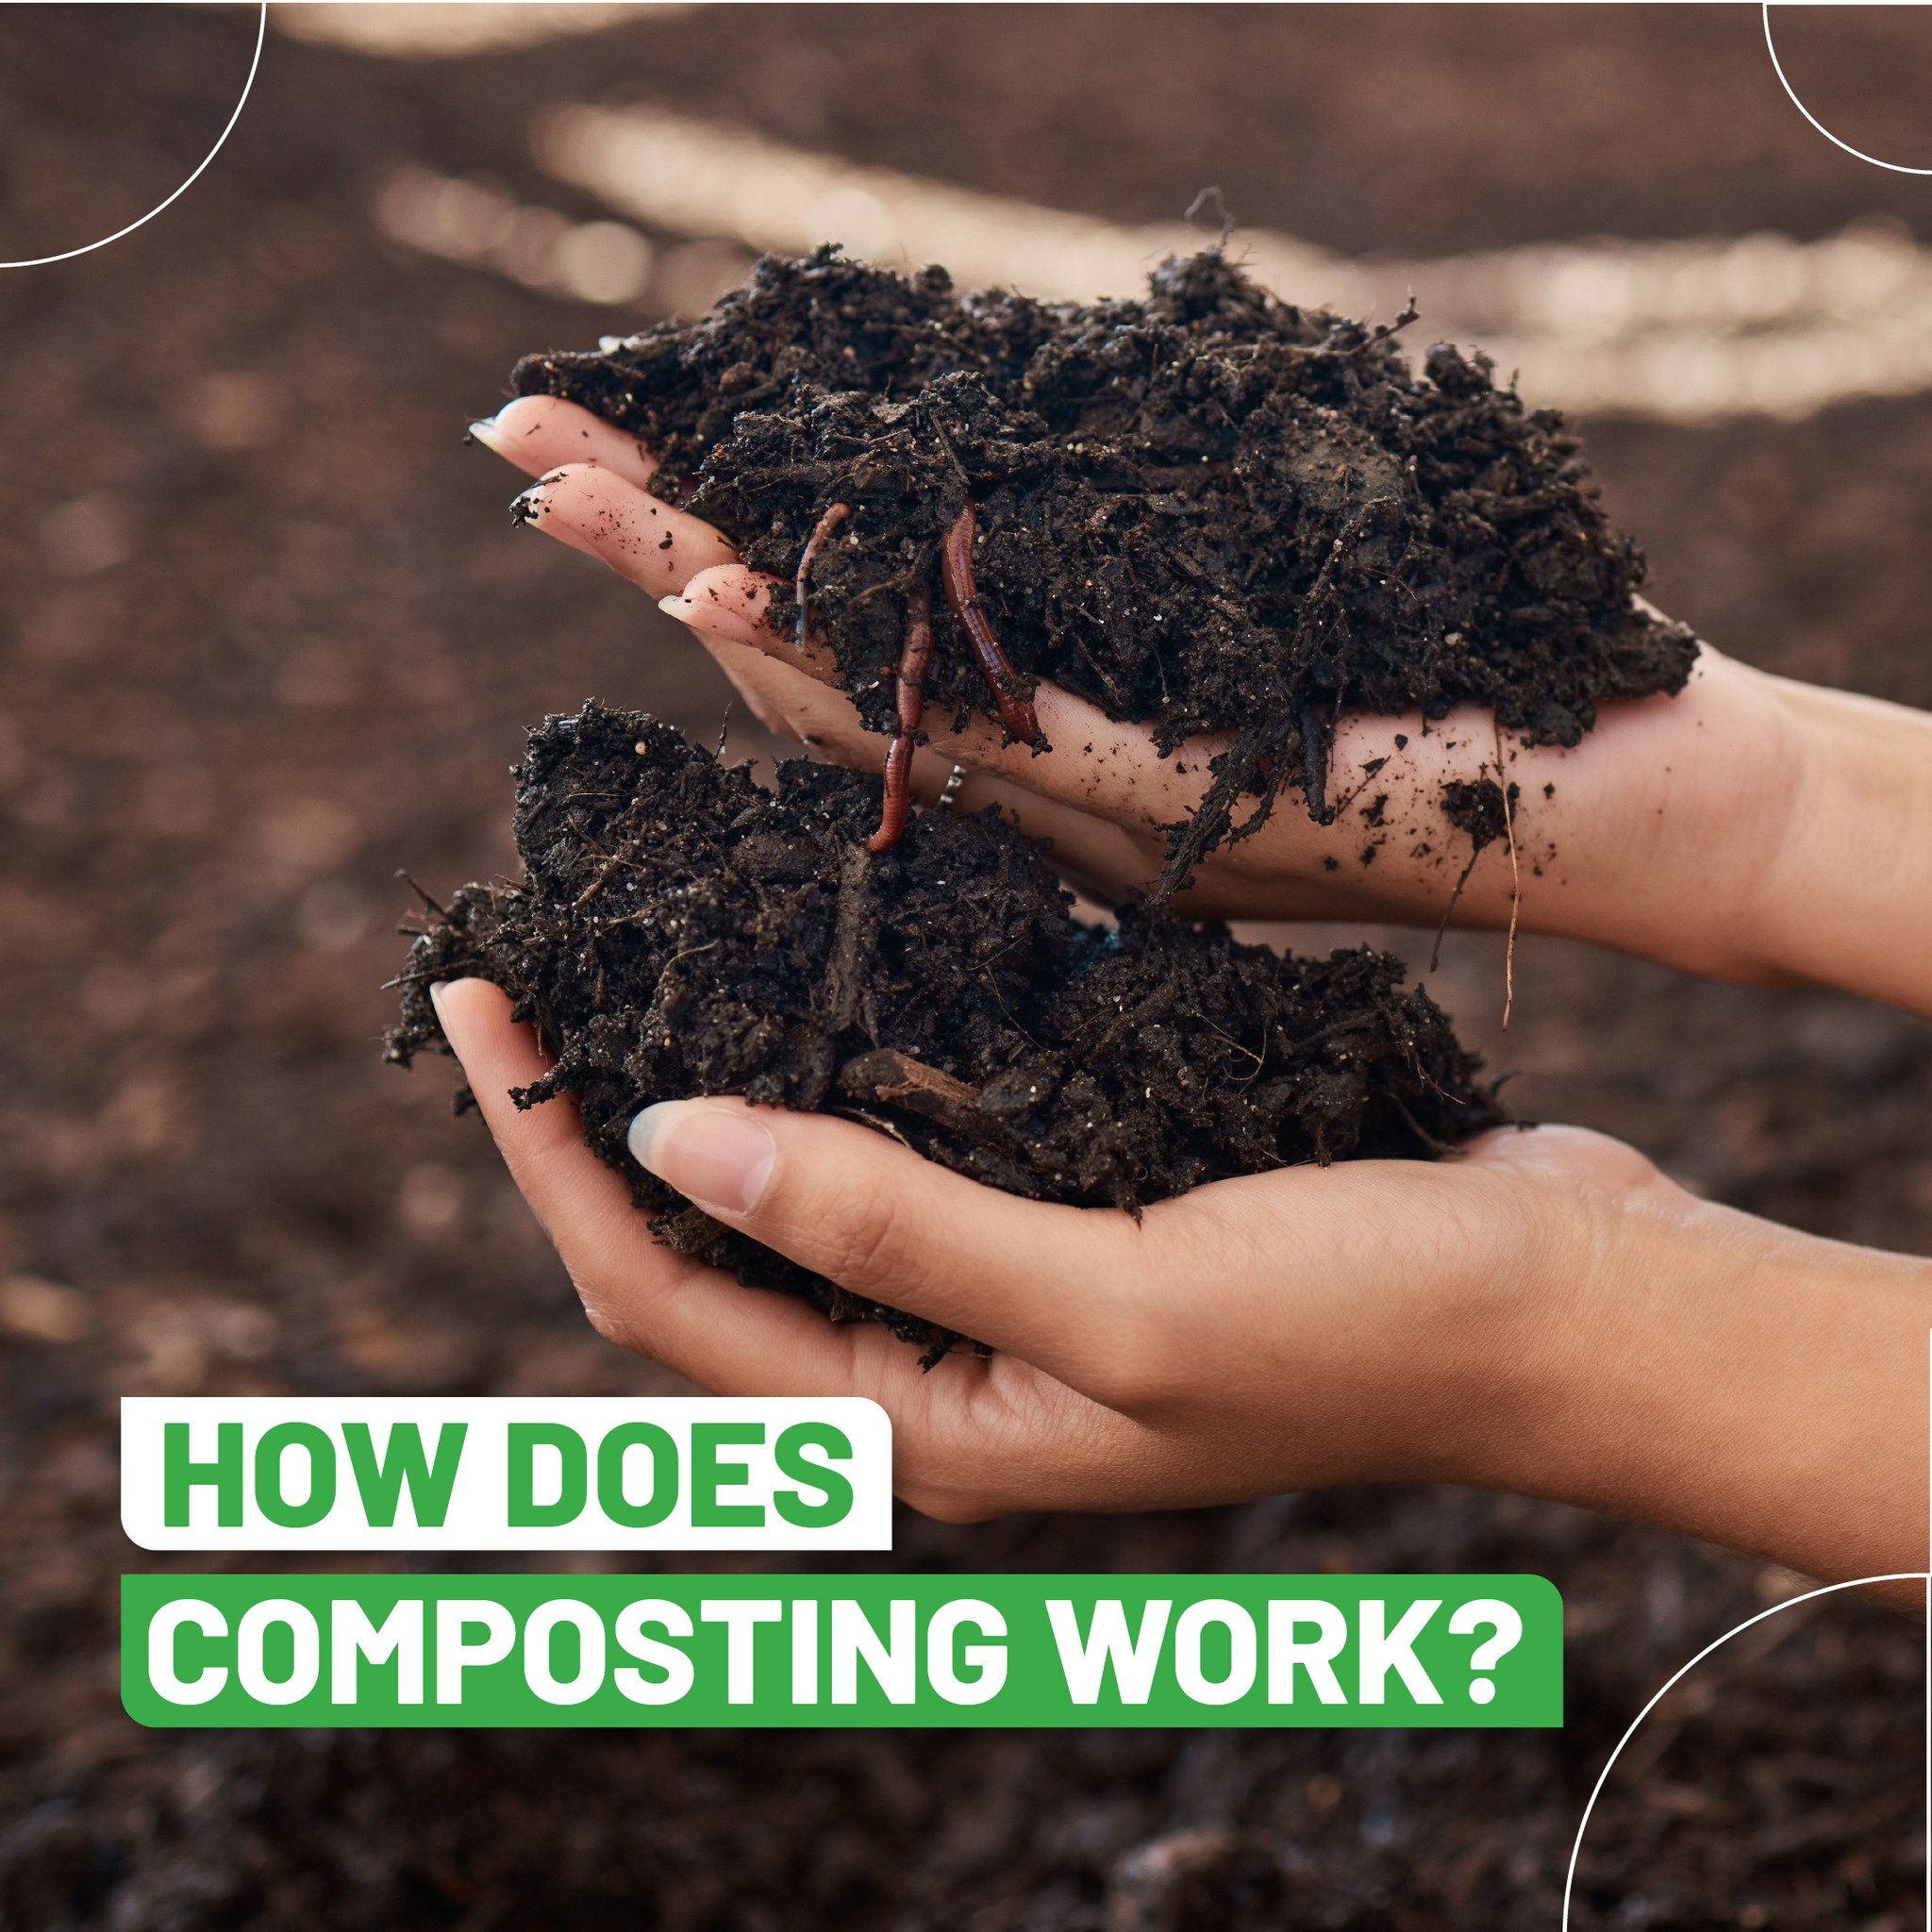 Over the past week we&rsquo;ve been celebrating International Compost Awareness Week, sharing posts about why composting is so beneficial and how you can compost at home. But do you know HOW composting actually works? 

Very simply, microorganisms, s